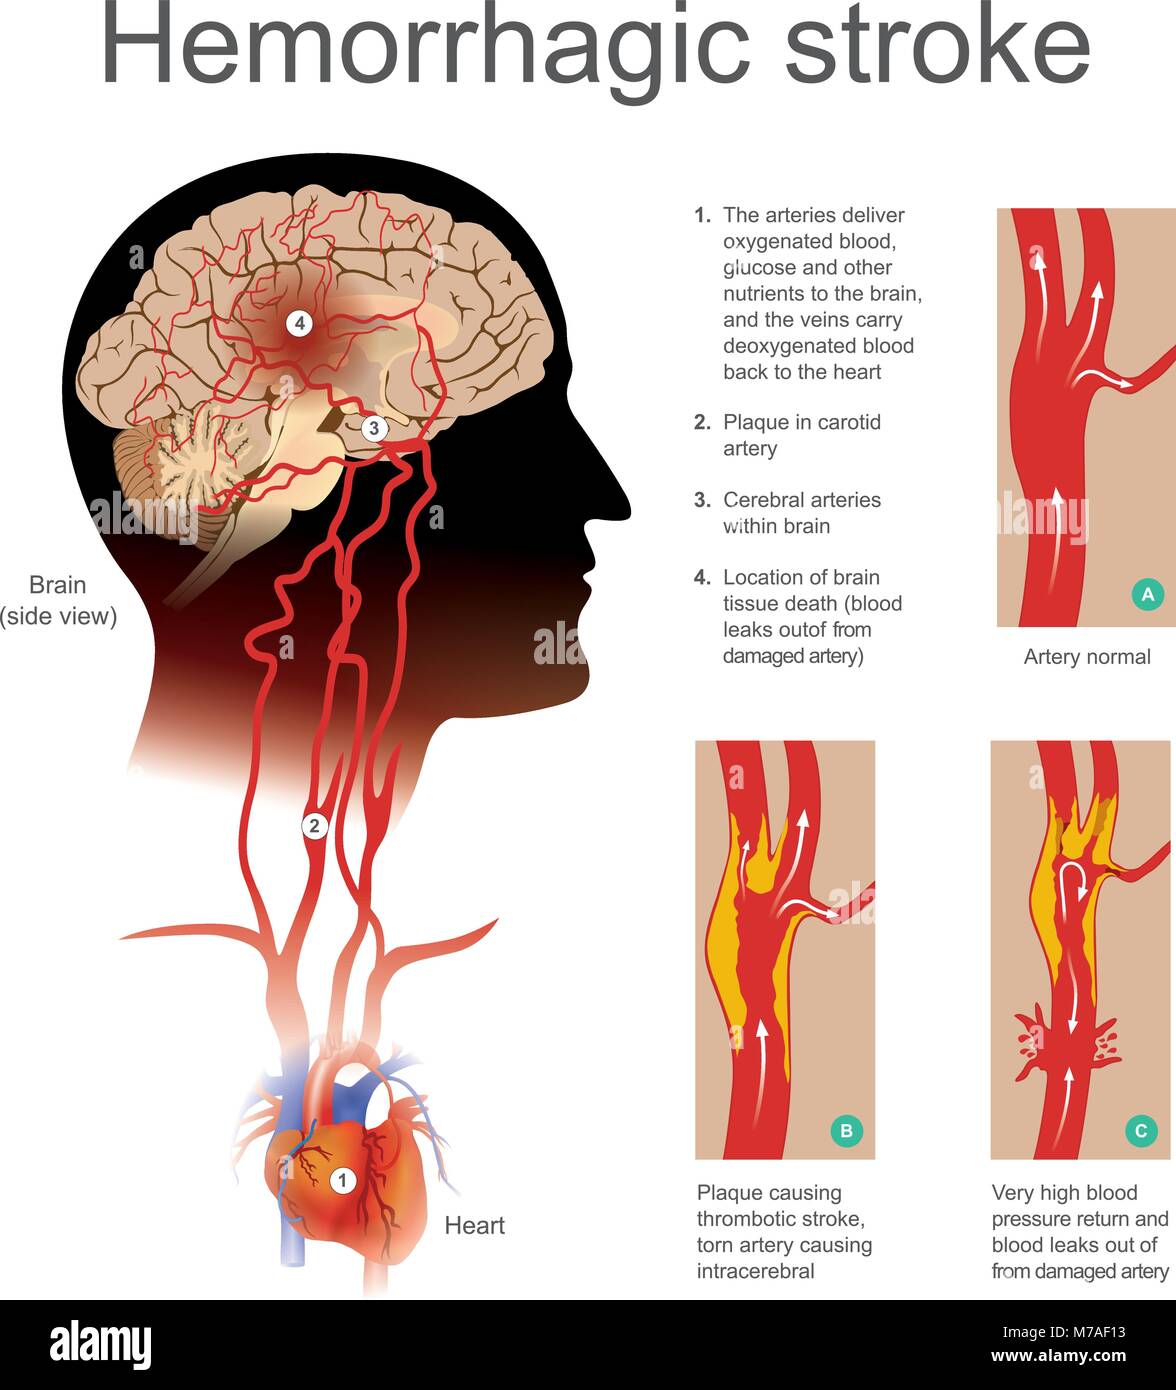 Plaque causing thrombotic stroke torn artery causing intracerebral. Very high blood return and blood leaks out of from damaged artery. Illustration hu Stock Vector